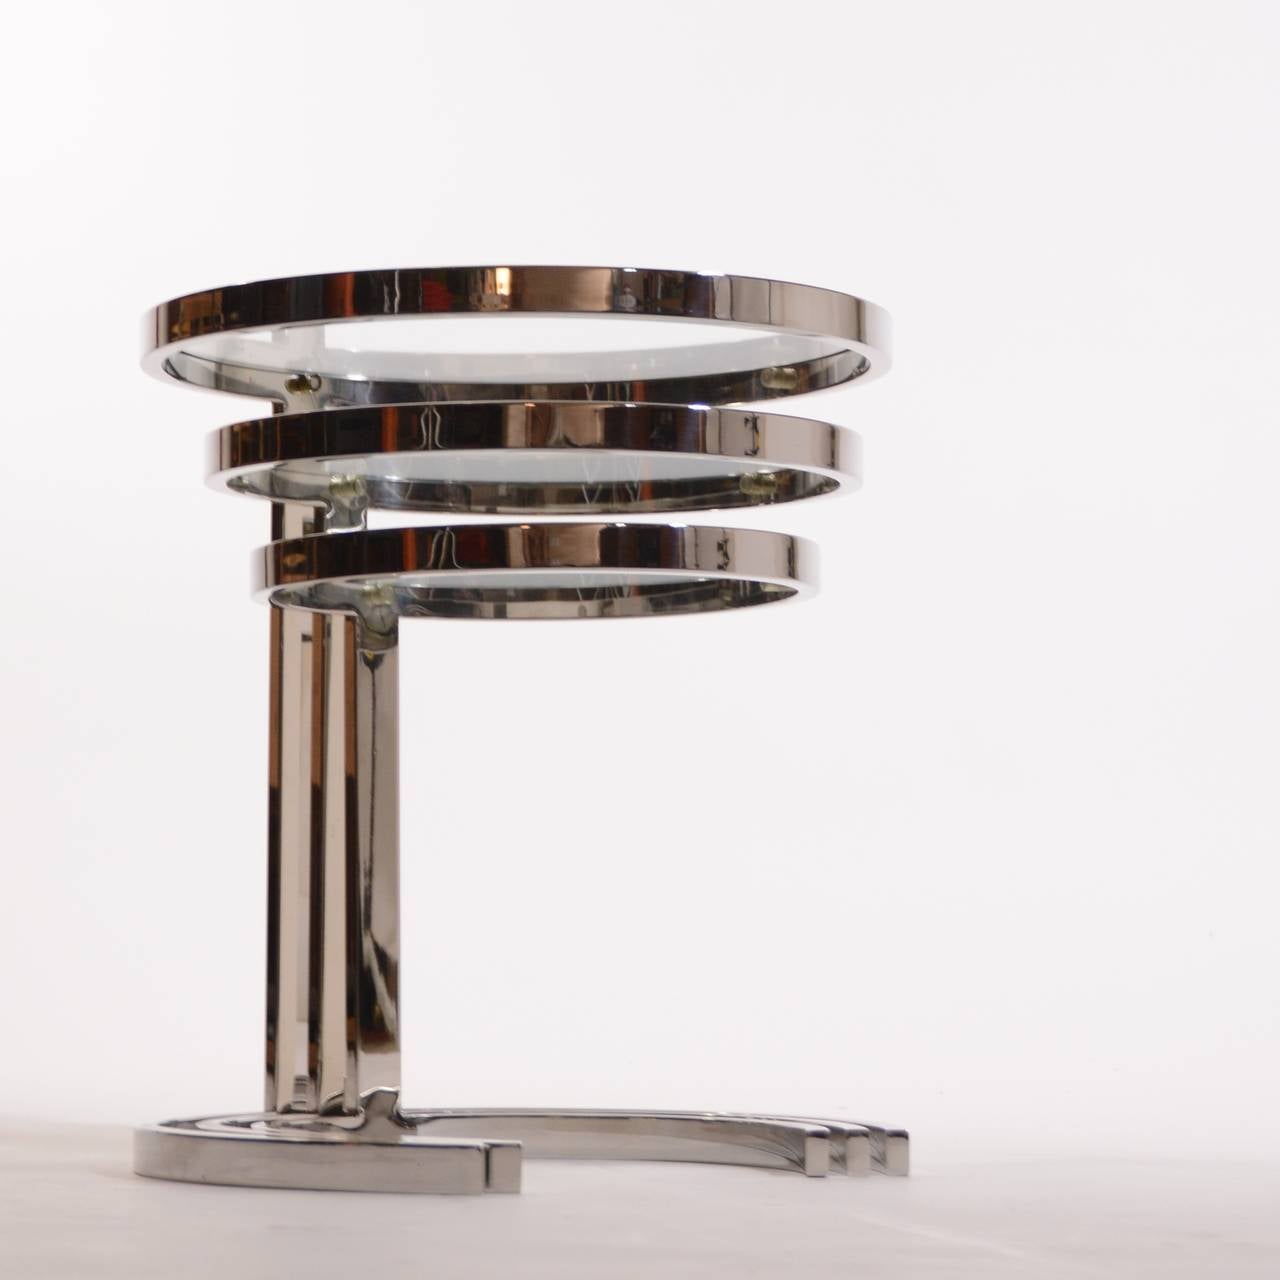 This is a beautiful set of 3 stainless steel nesting tables by Brueton circa 1982.  These tables are flawless and show almost no wear.  

Small Table: 12